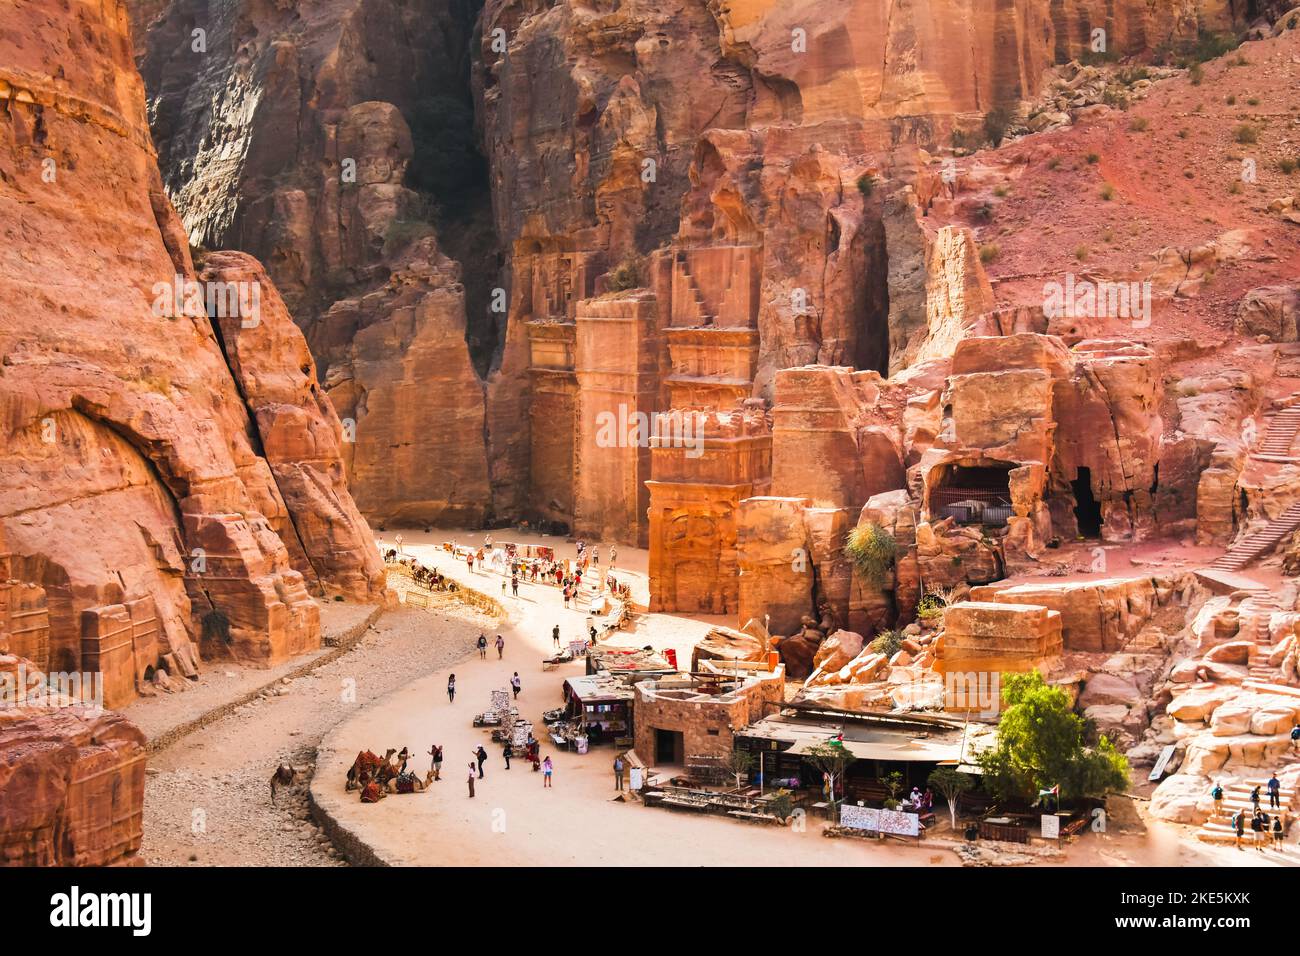 Tourist walk by caves of tombs in ancient city of Petra, Jordan. It is know as the Loculi. Petra has led to its designation as UNESCO World Heritage S Stock Photo